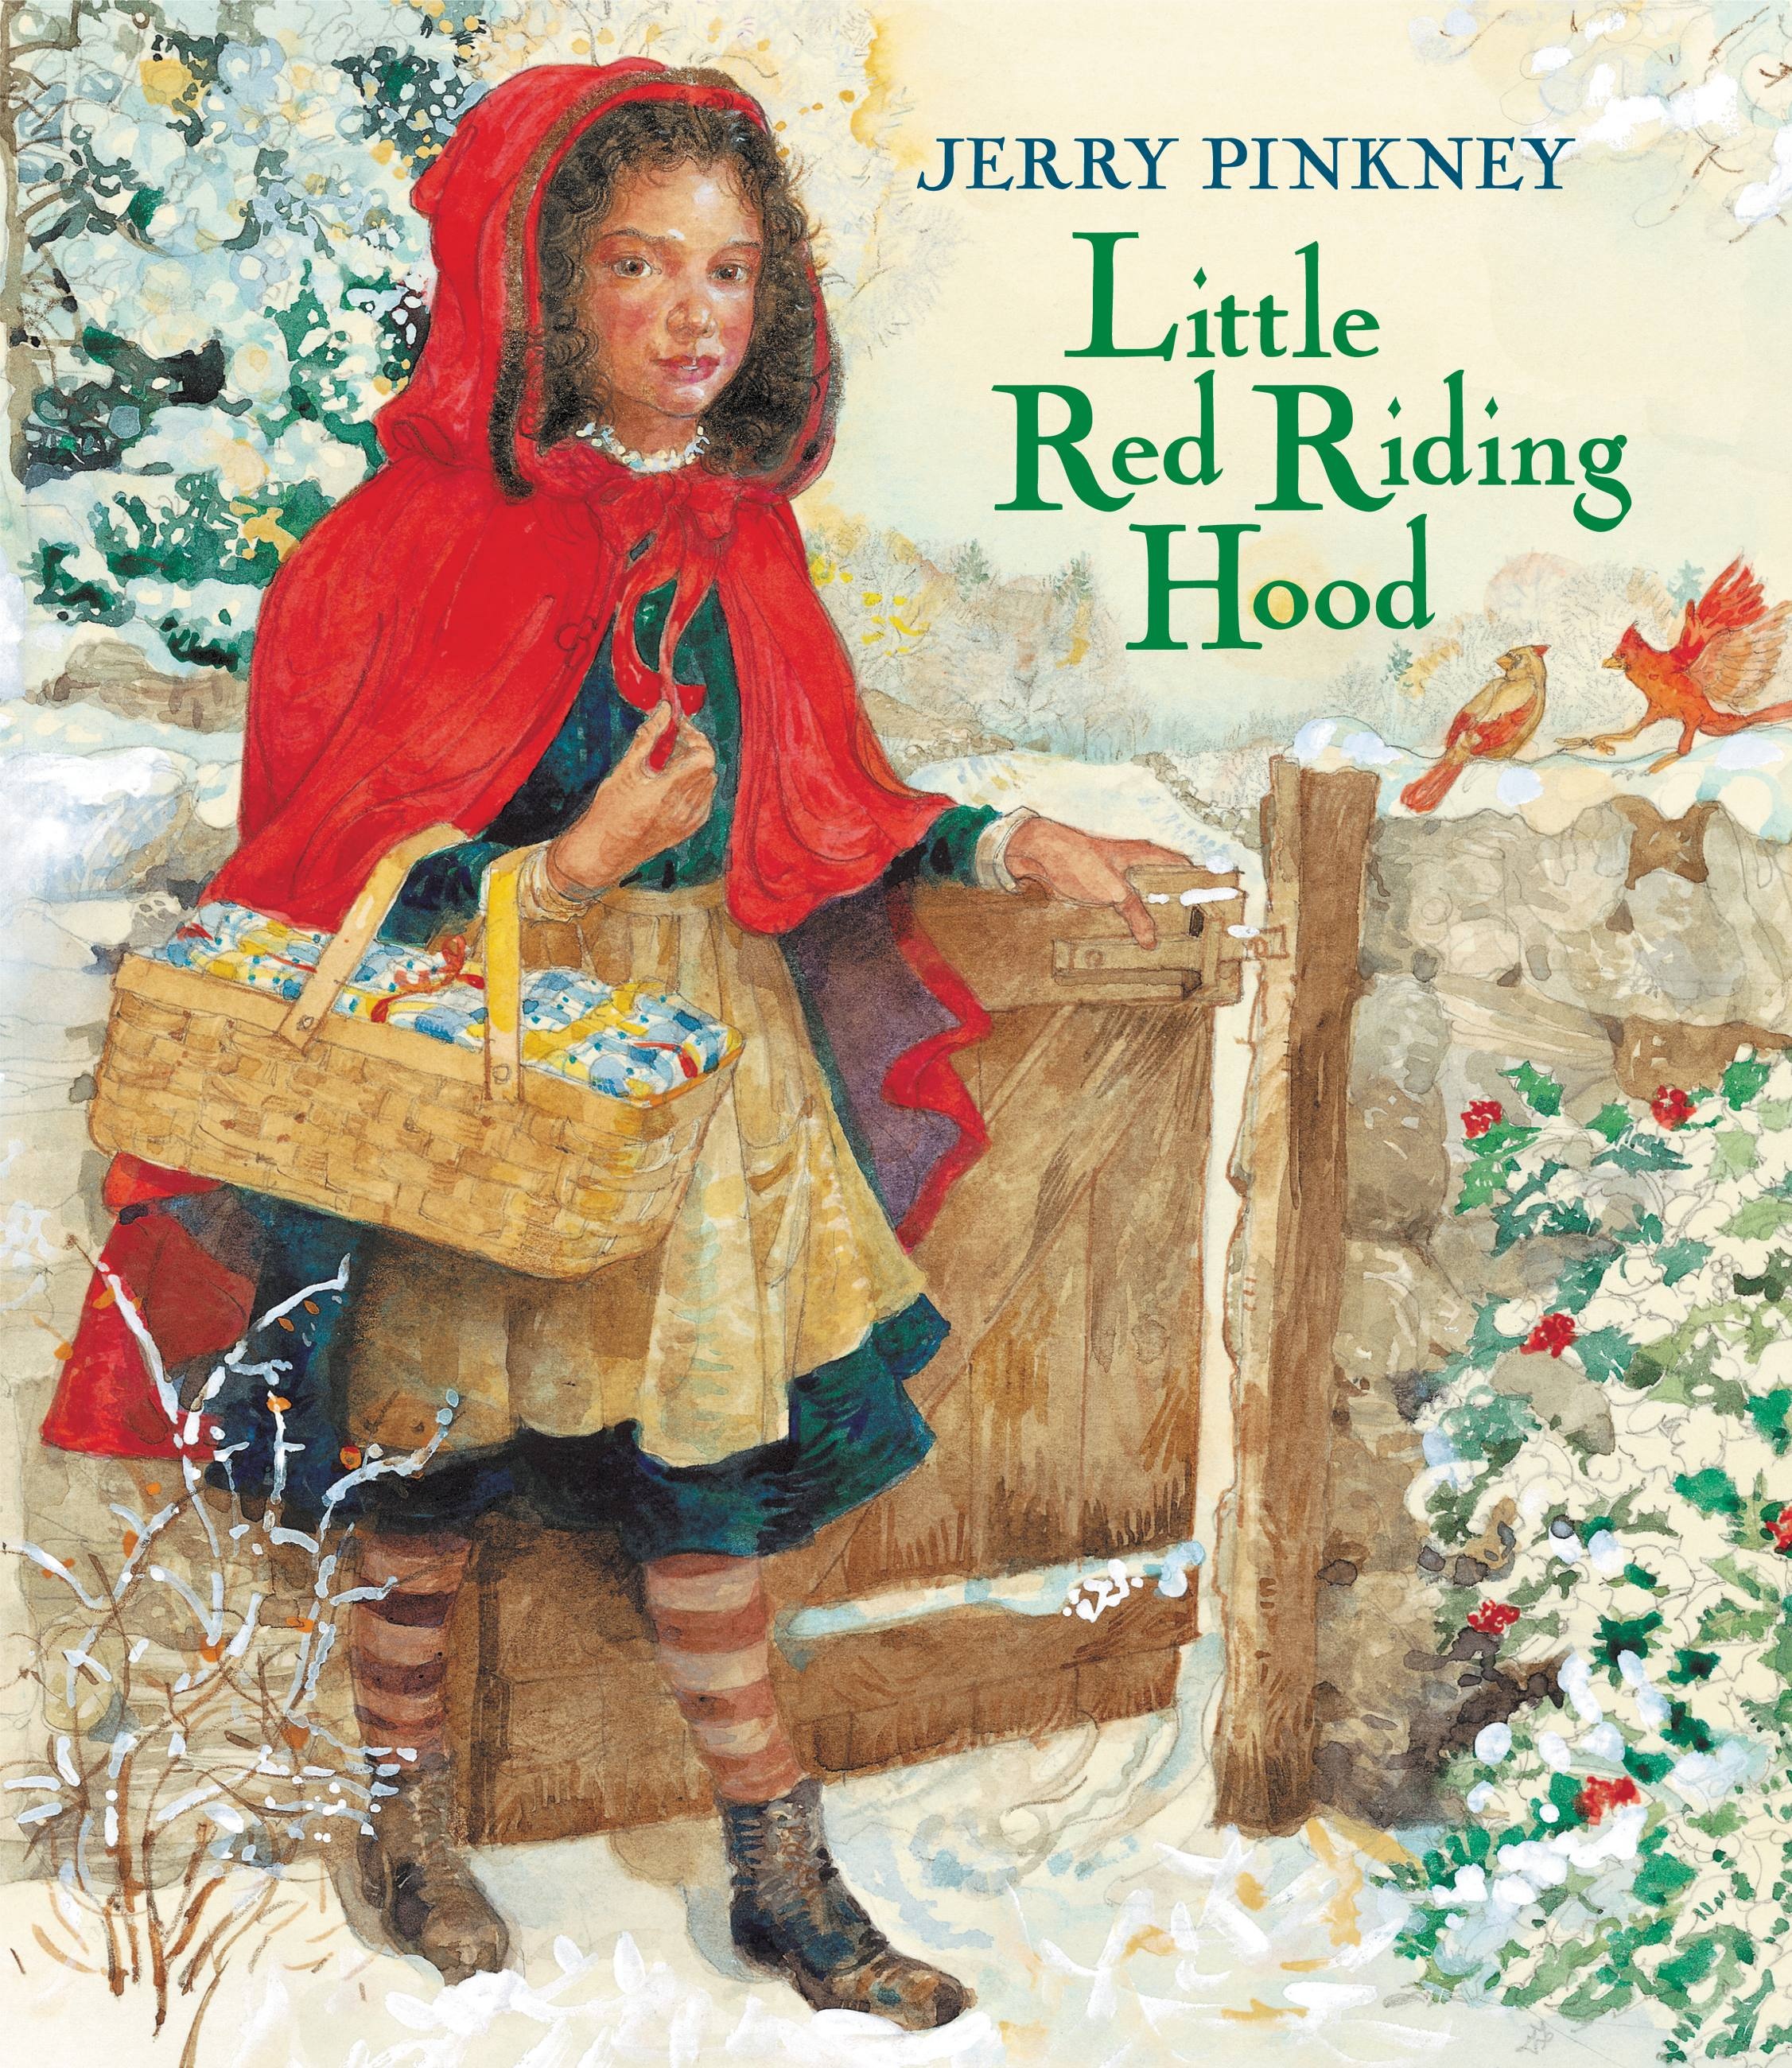 Little Red Riding Hood by Jerry Pinkney | Little, Brown Books for Young Readers